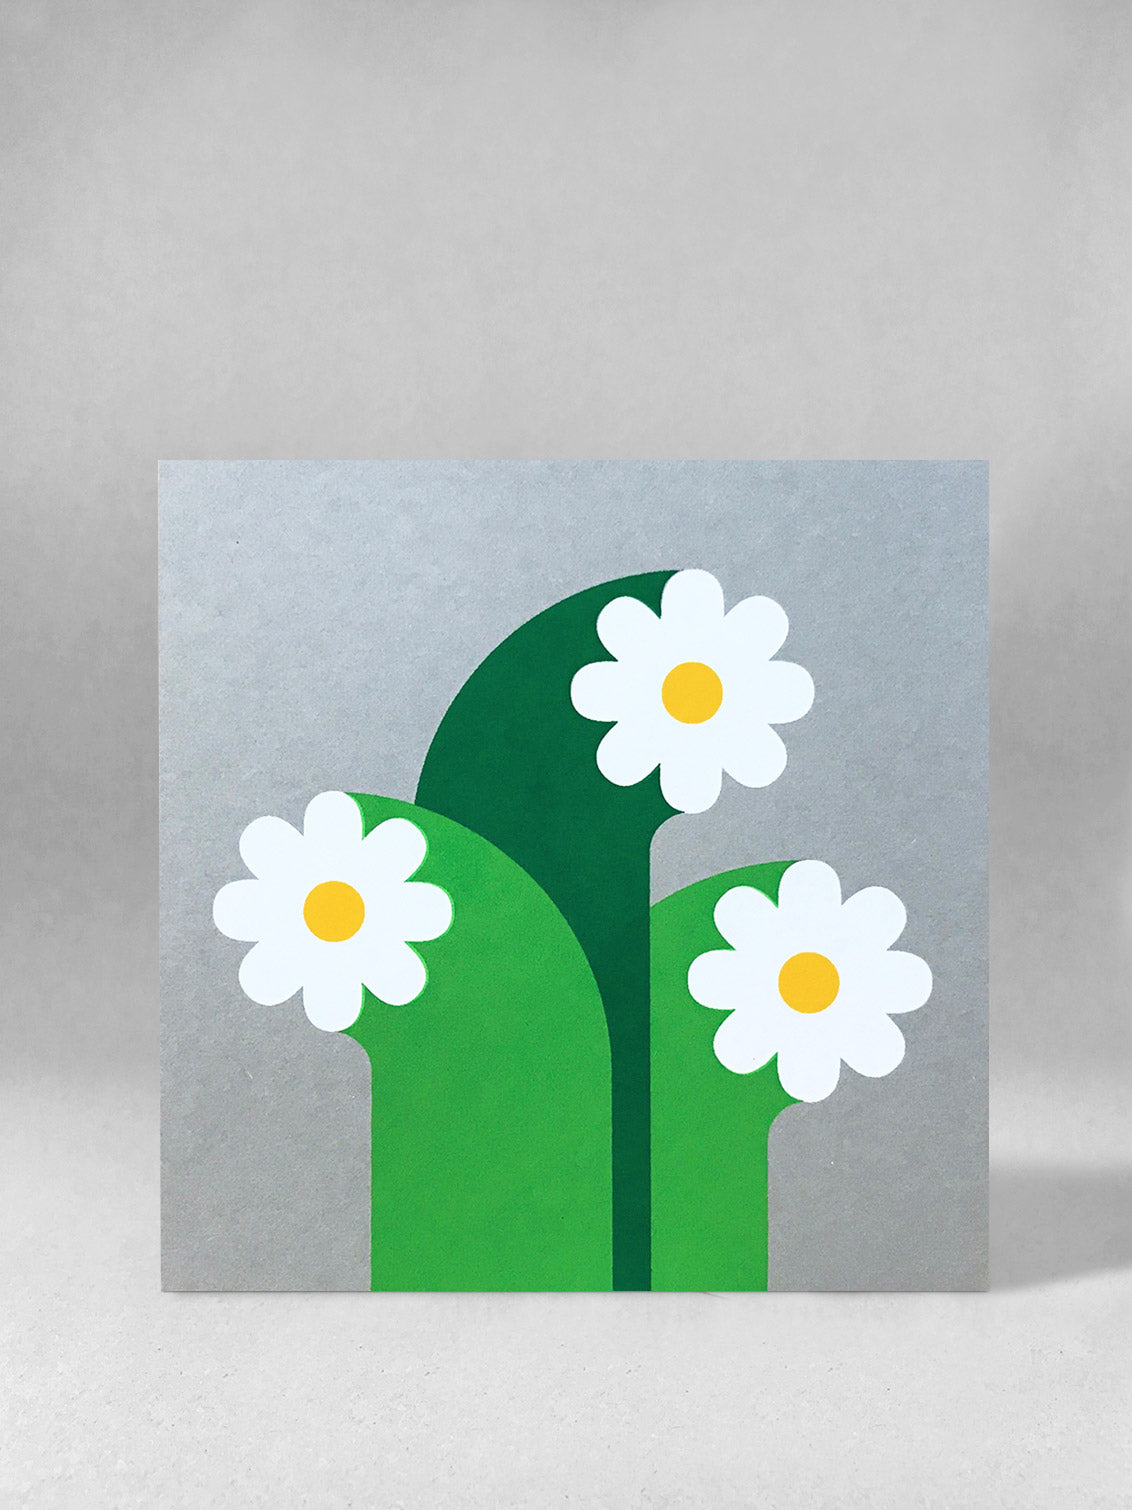  Three white flowers with graphic wide stalks and golden yellow circle centres, screenprinted onto grey card, stood front on in a light grey studio shot.